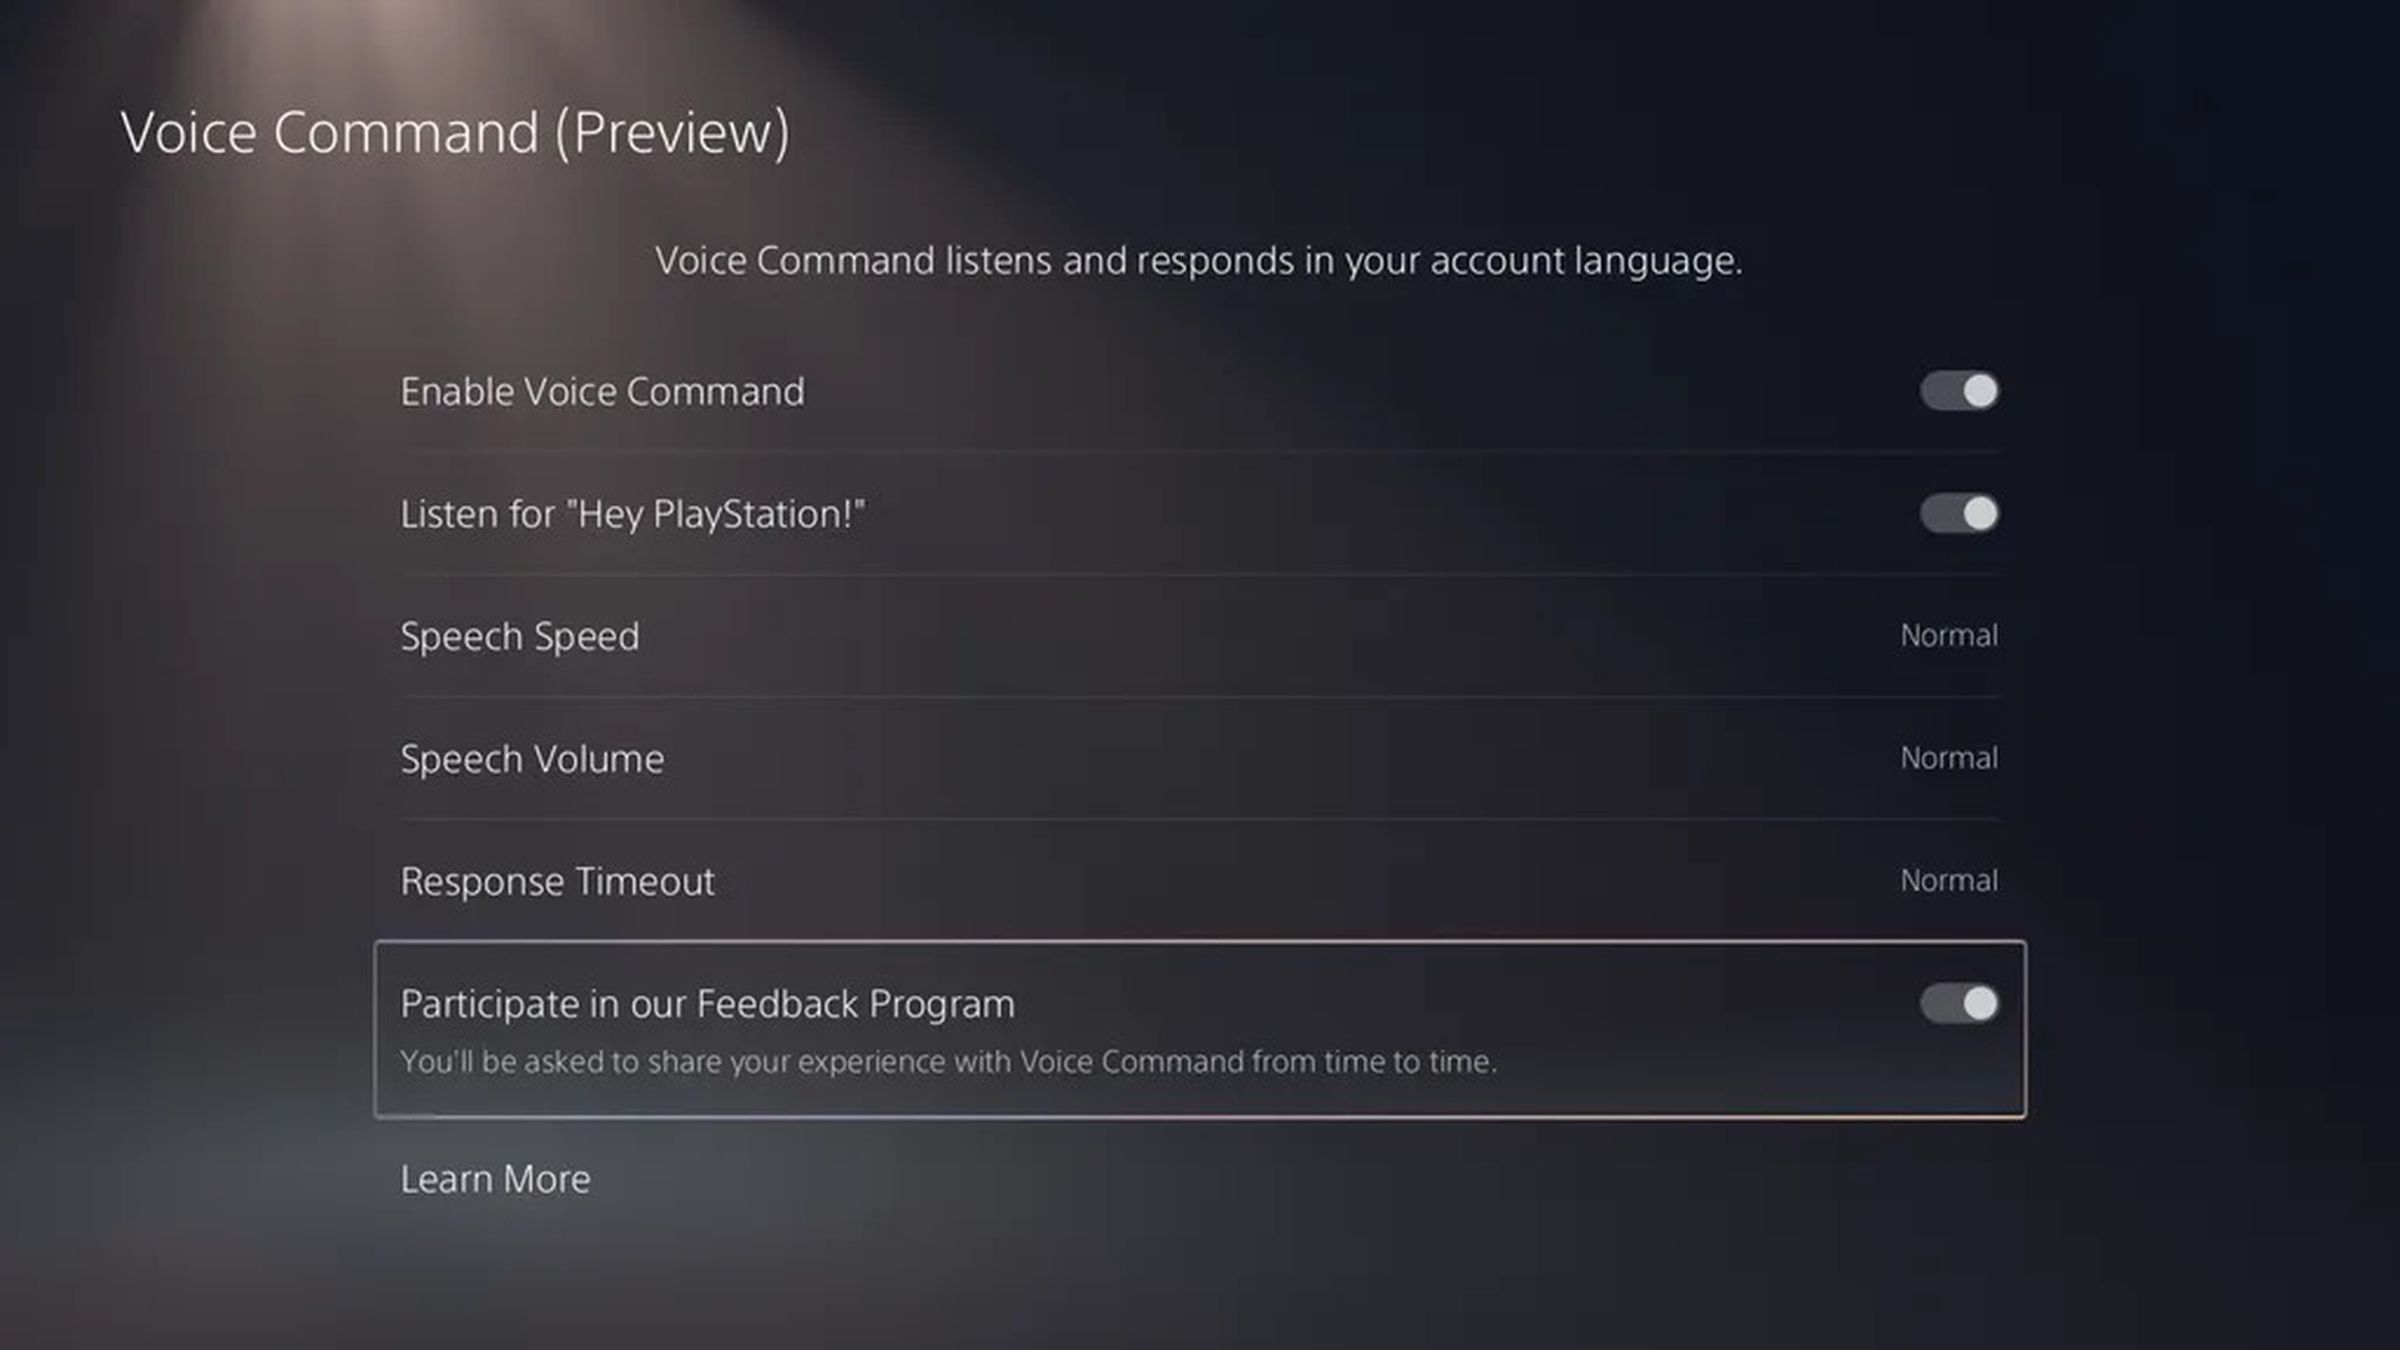 Here are the settings for the upcoming voice commands feature.